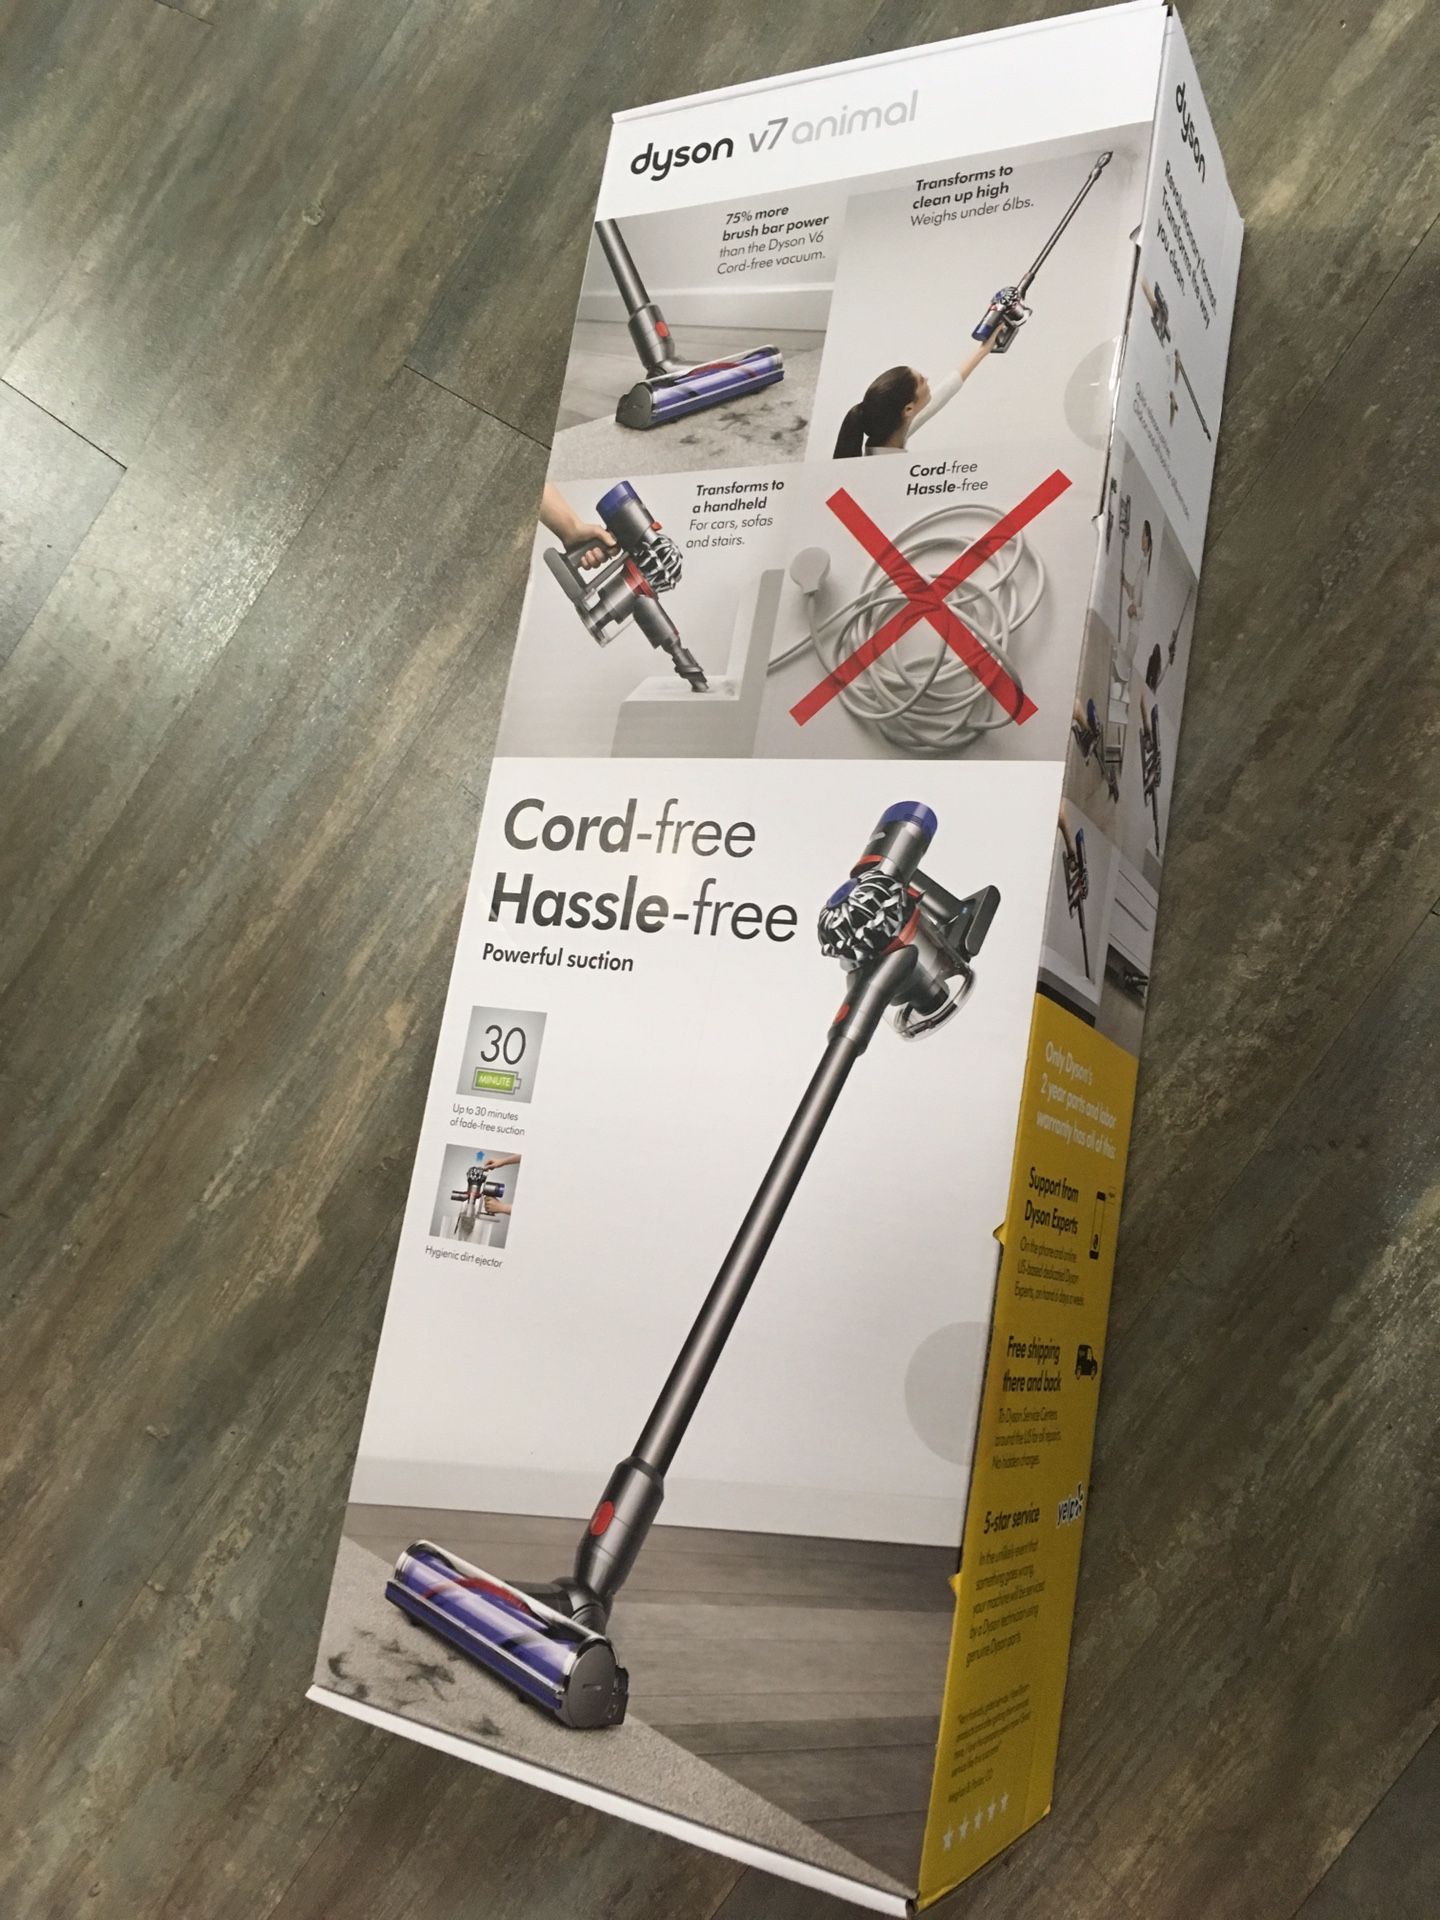 Dyson v7 animal cordless vaccum cleaner